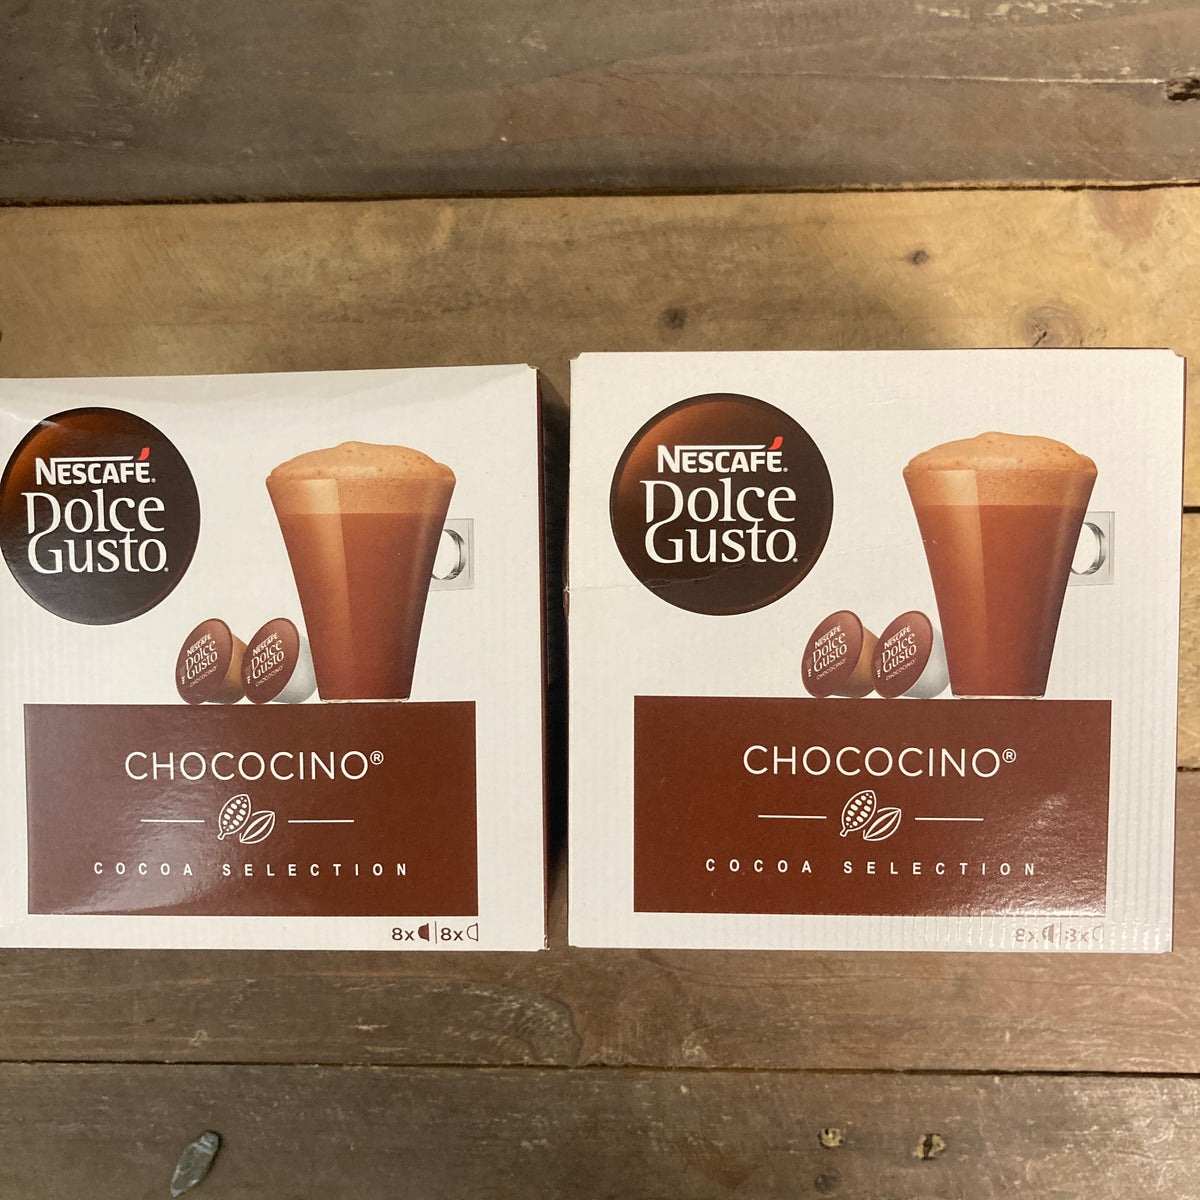 32x Nescafe Dolce Gusto Chococino Pods (2 Boxes of 16 Pods) Dolce Gusto  Check us out online today! Find what you're seeking here